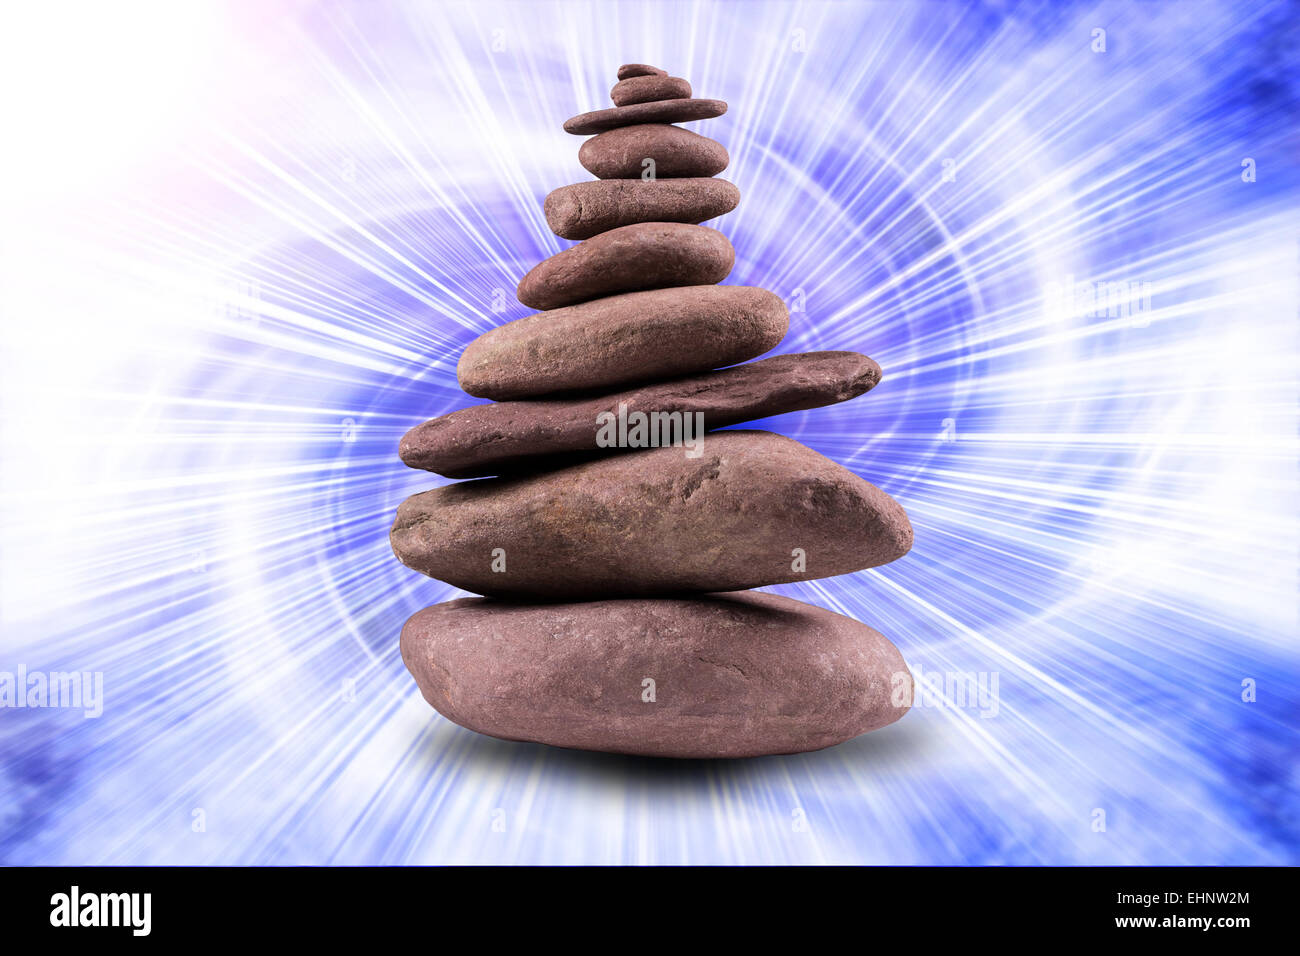 Zen like, balanced stone tower with a background. Stock Photo